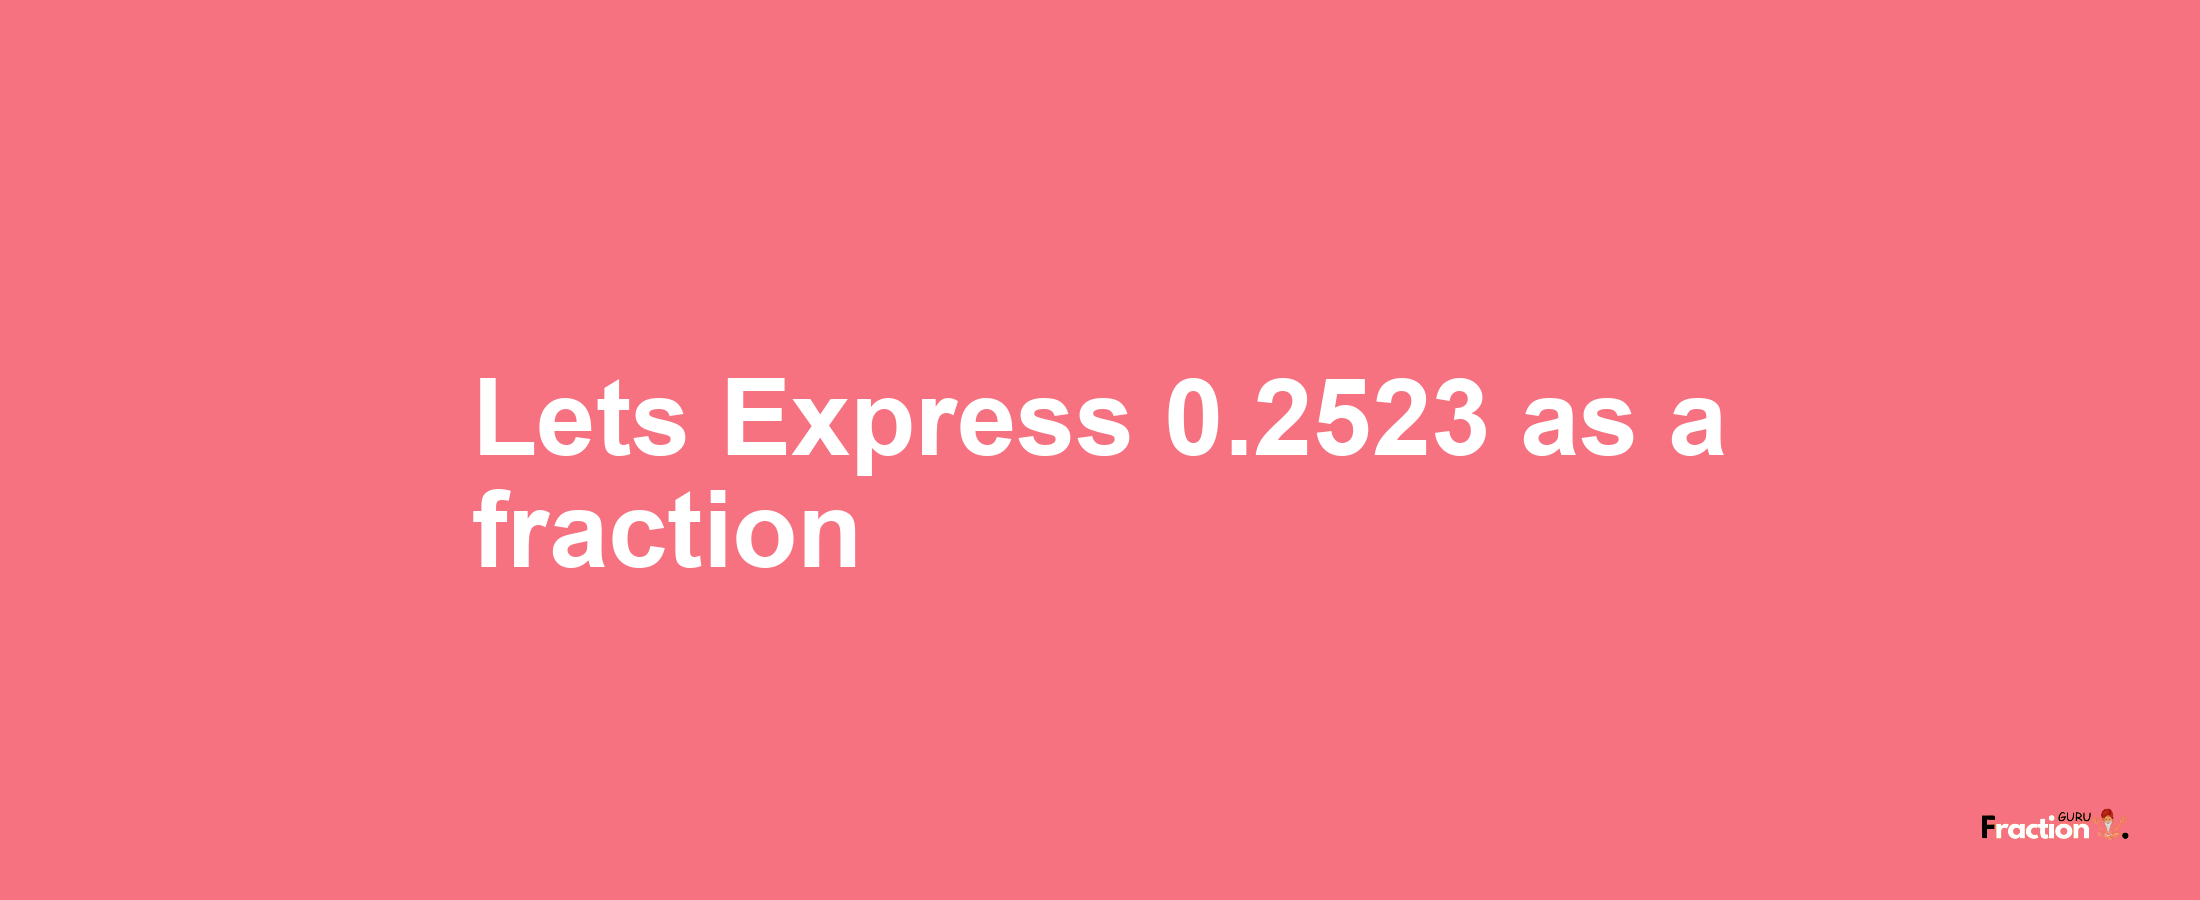 Lets Express 0.2523 as afraction